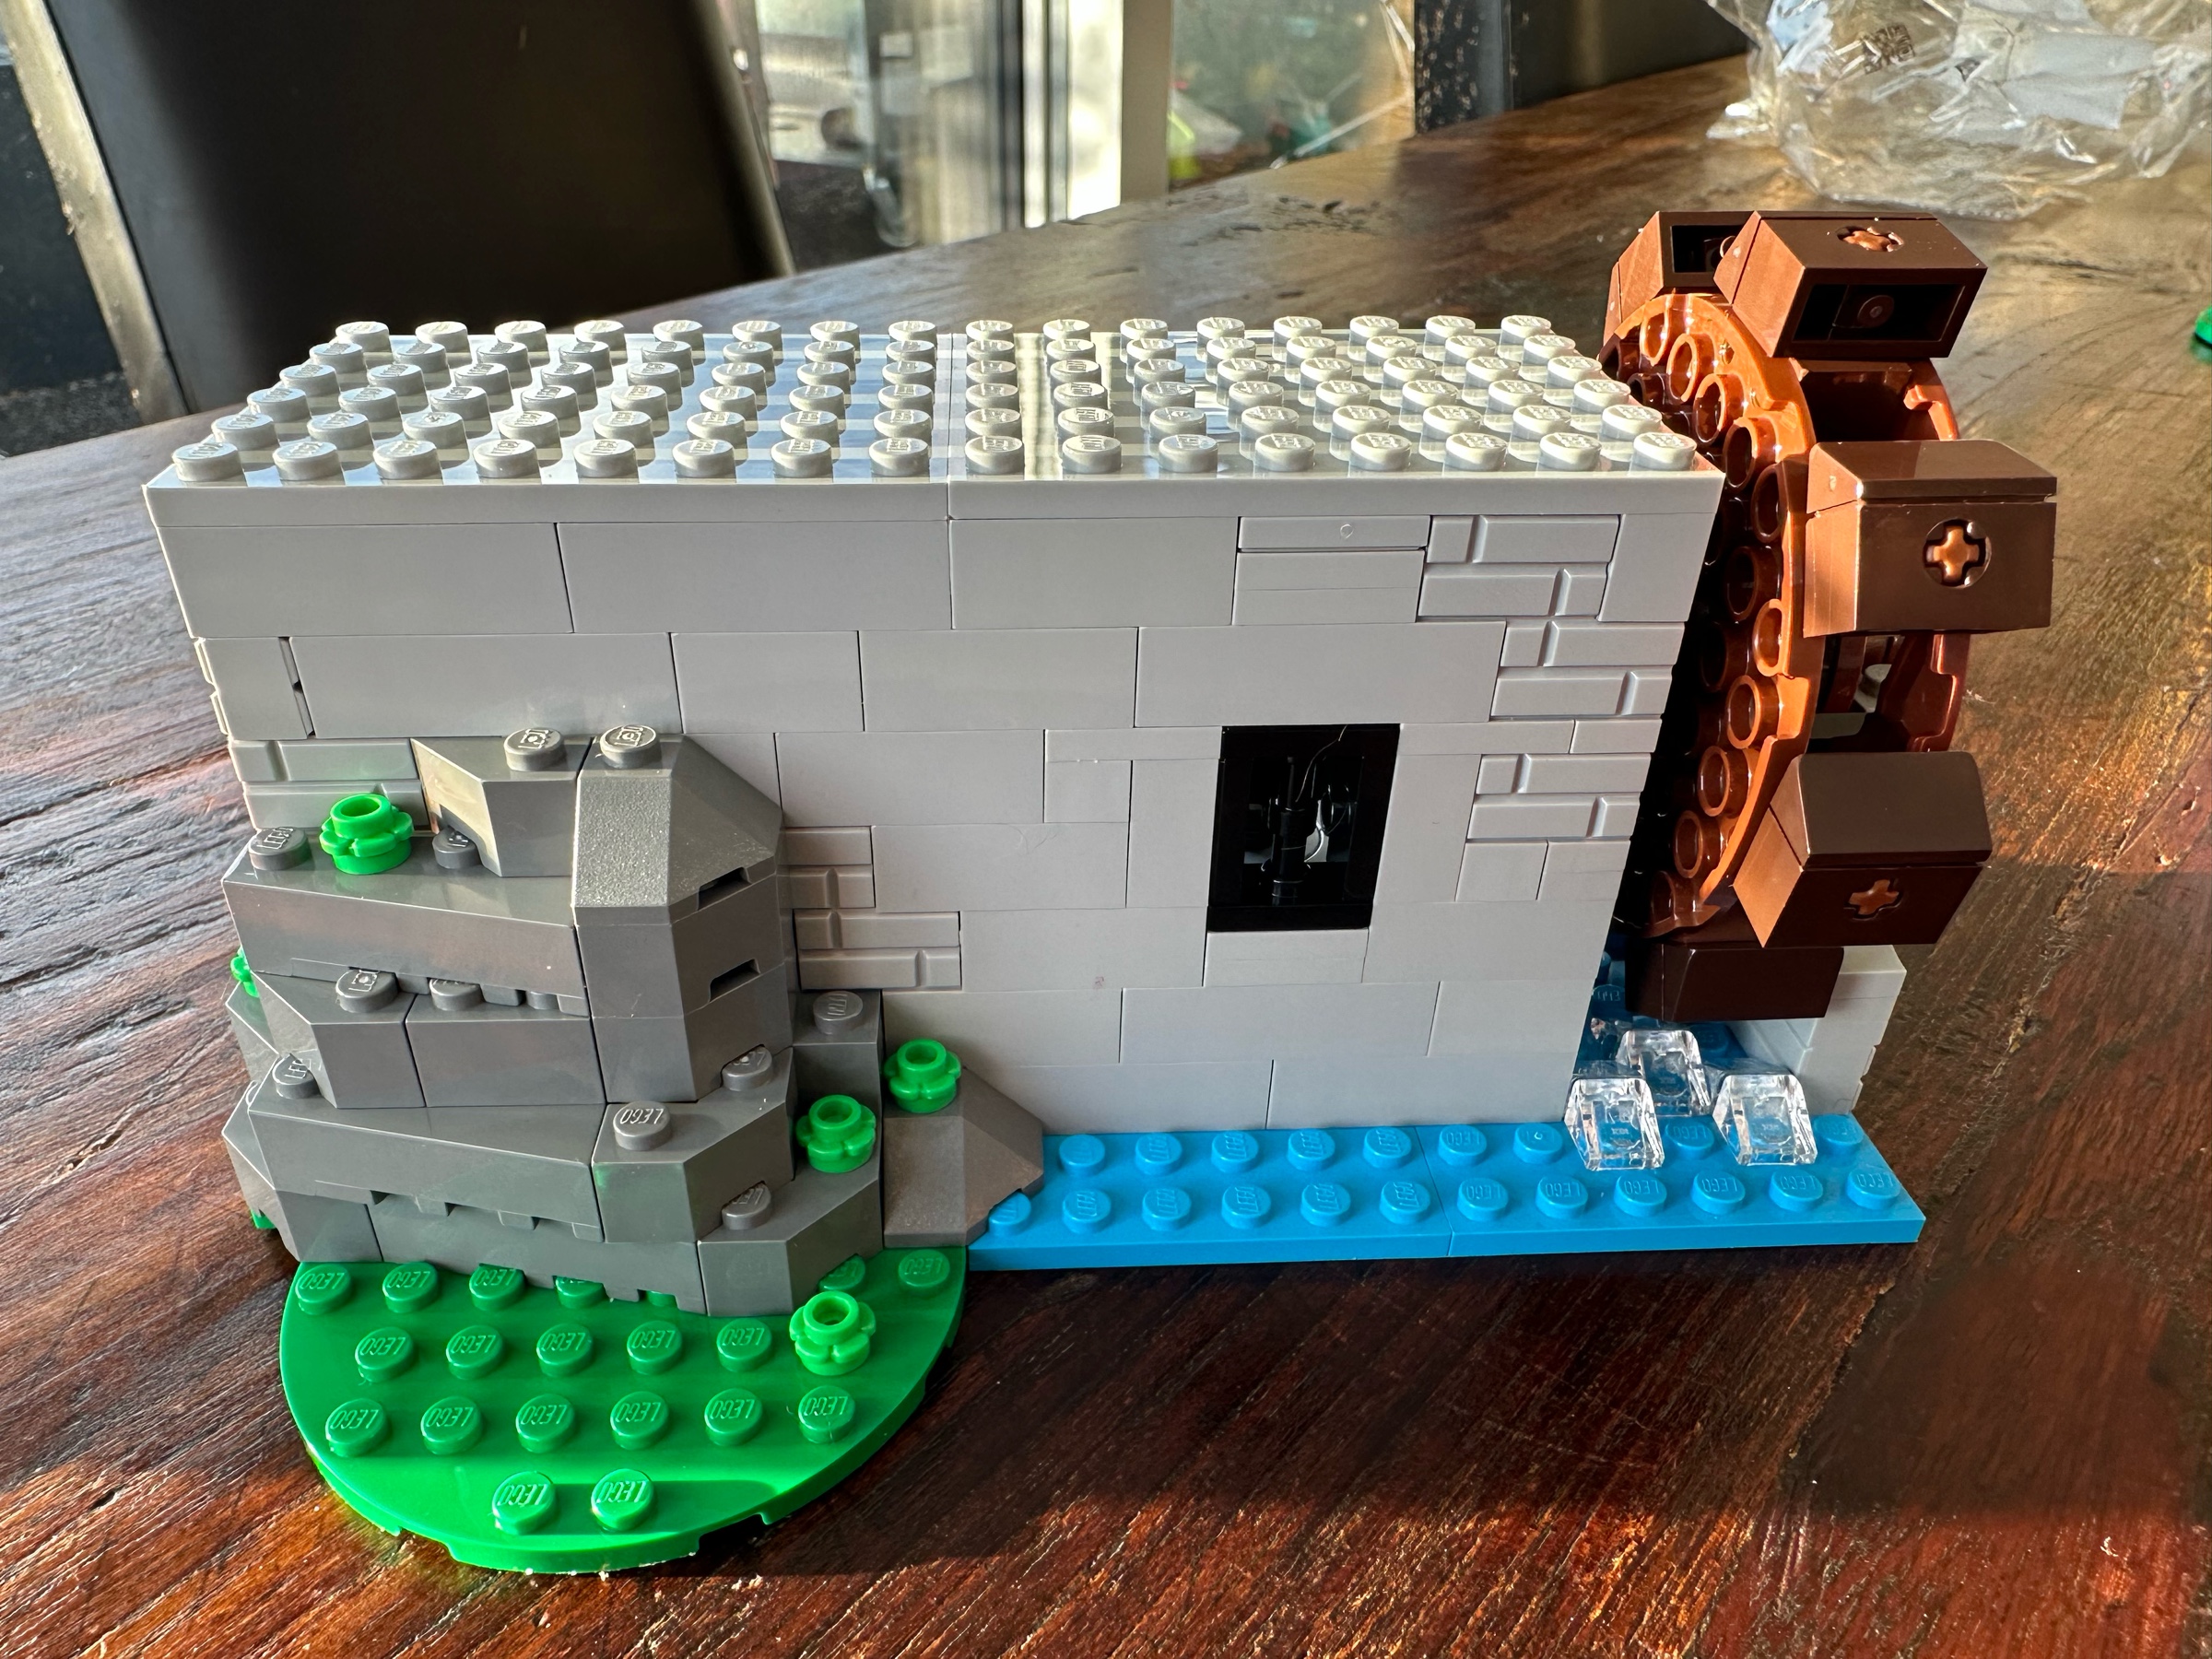 Exterior view of LEGO castle section showing a water wheel over a flowing stream on the right, a single low barred window in the center, and a rocky outcropping on the left.